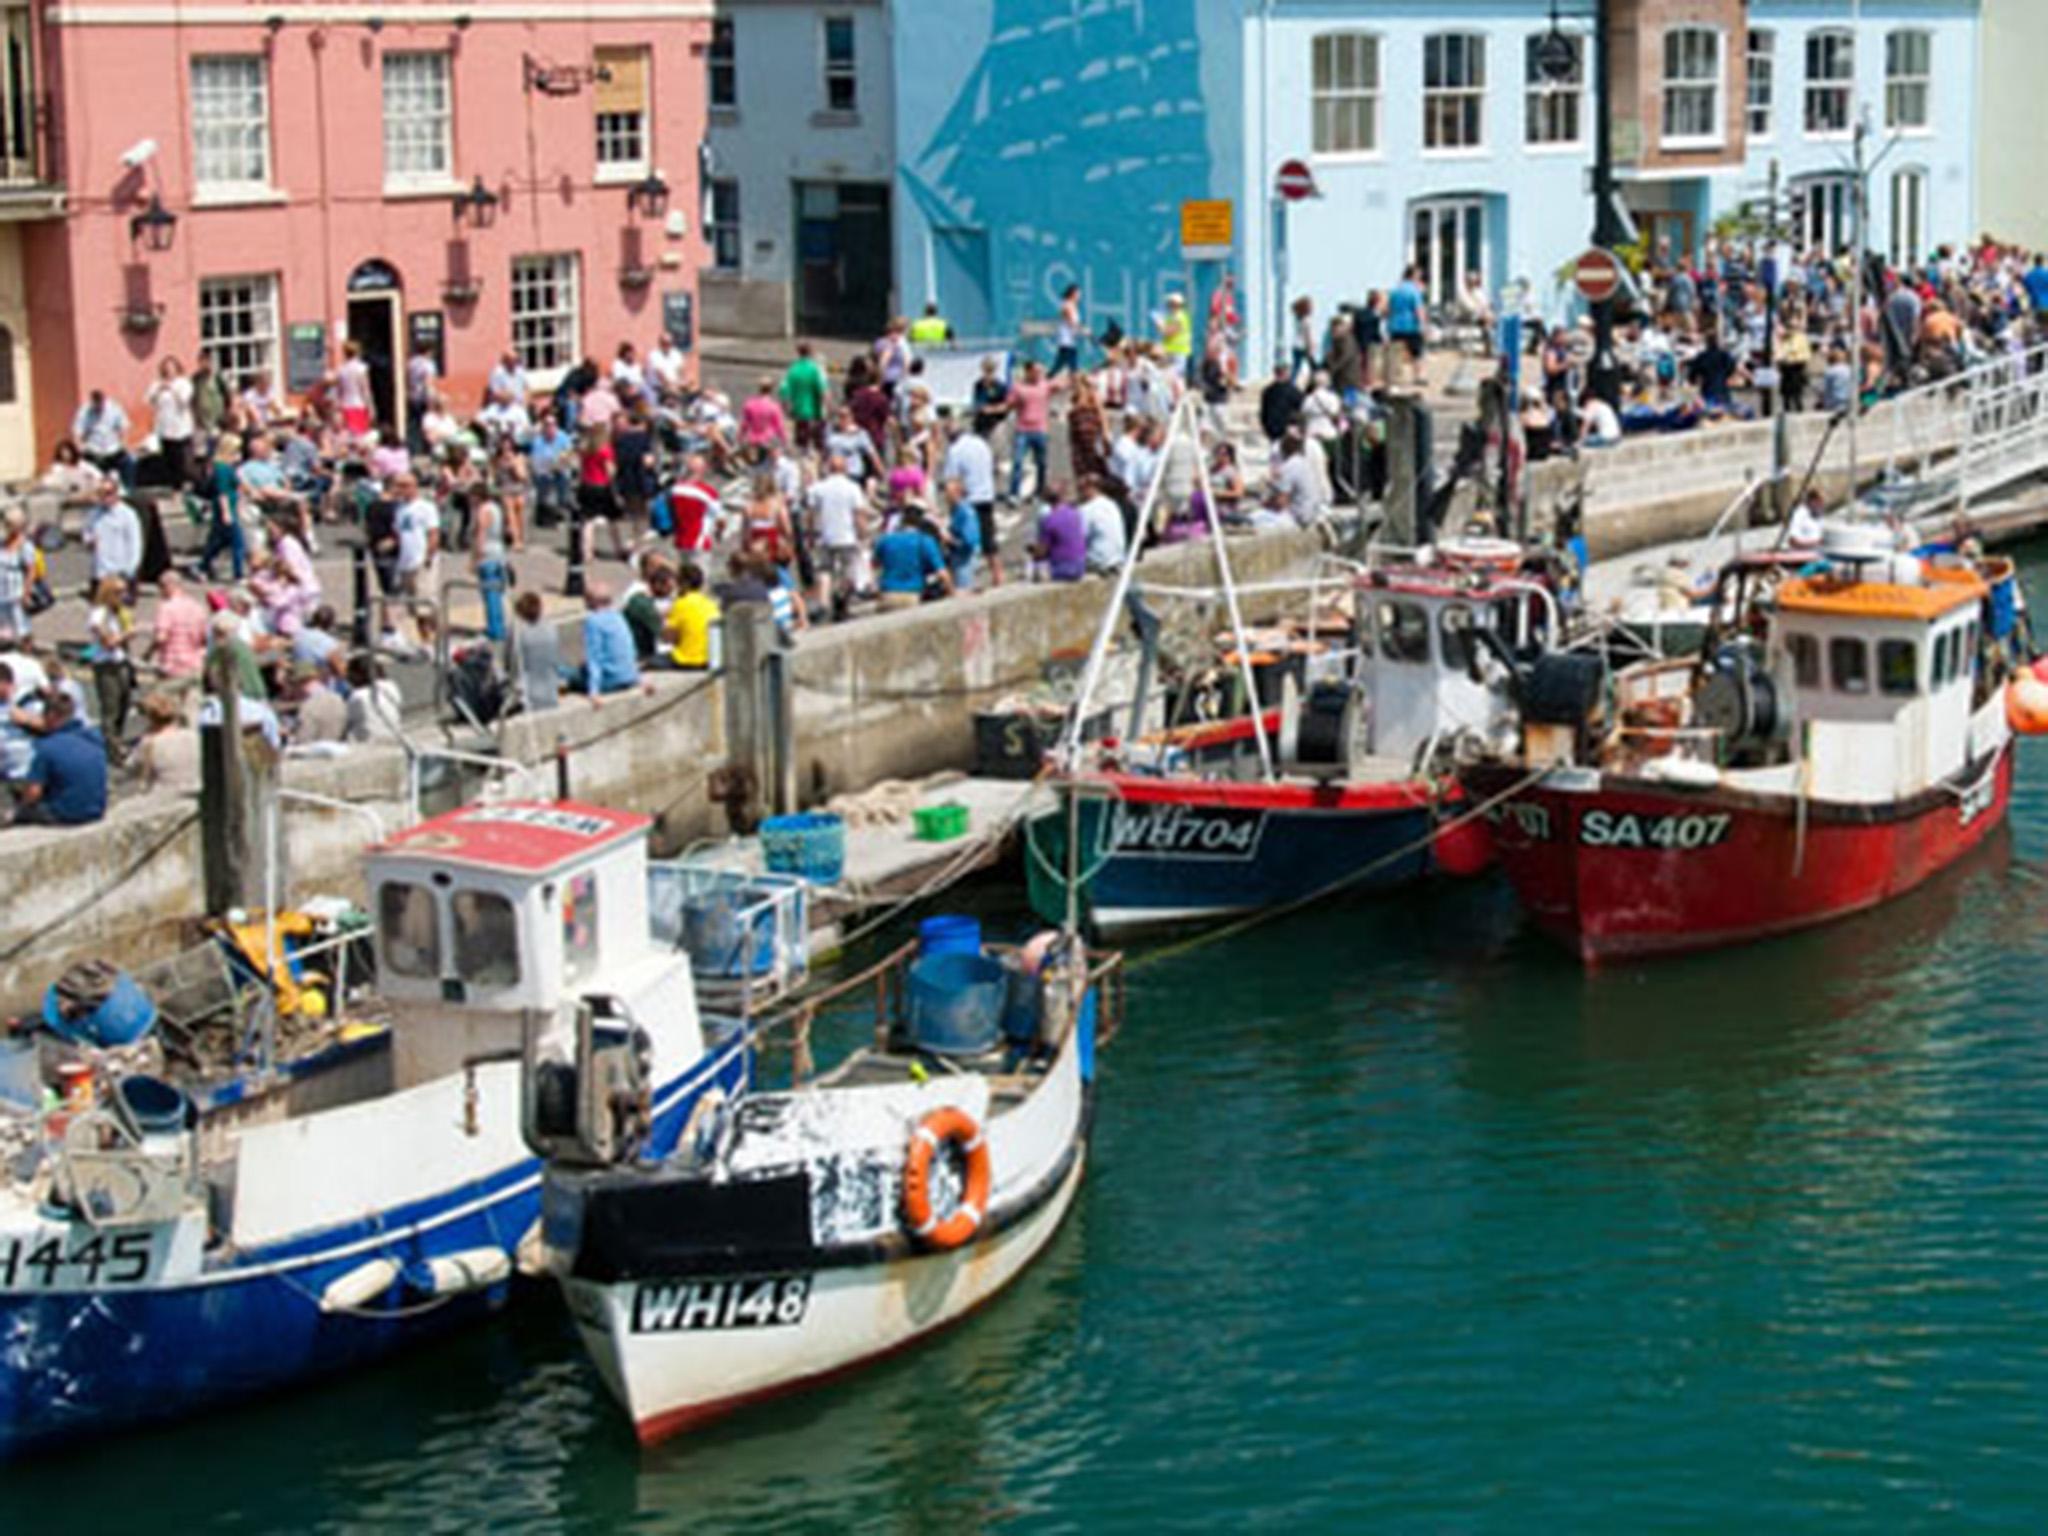 Quay decision: the seafood festival raises money for a fishermen’s charity